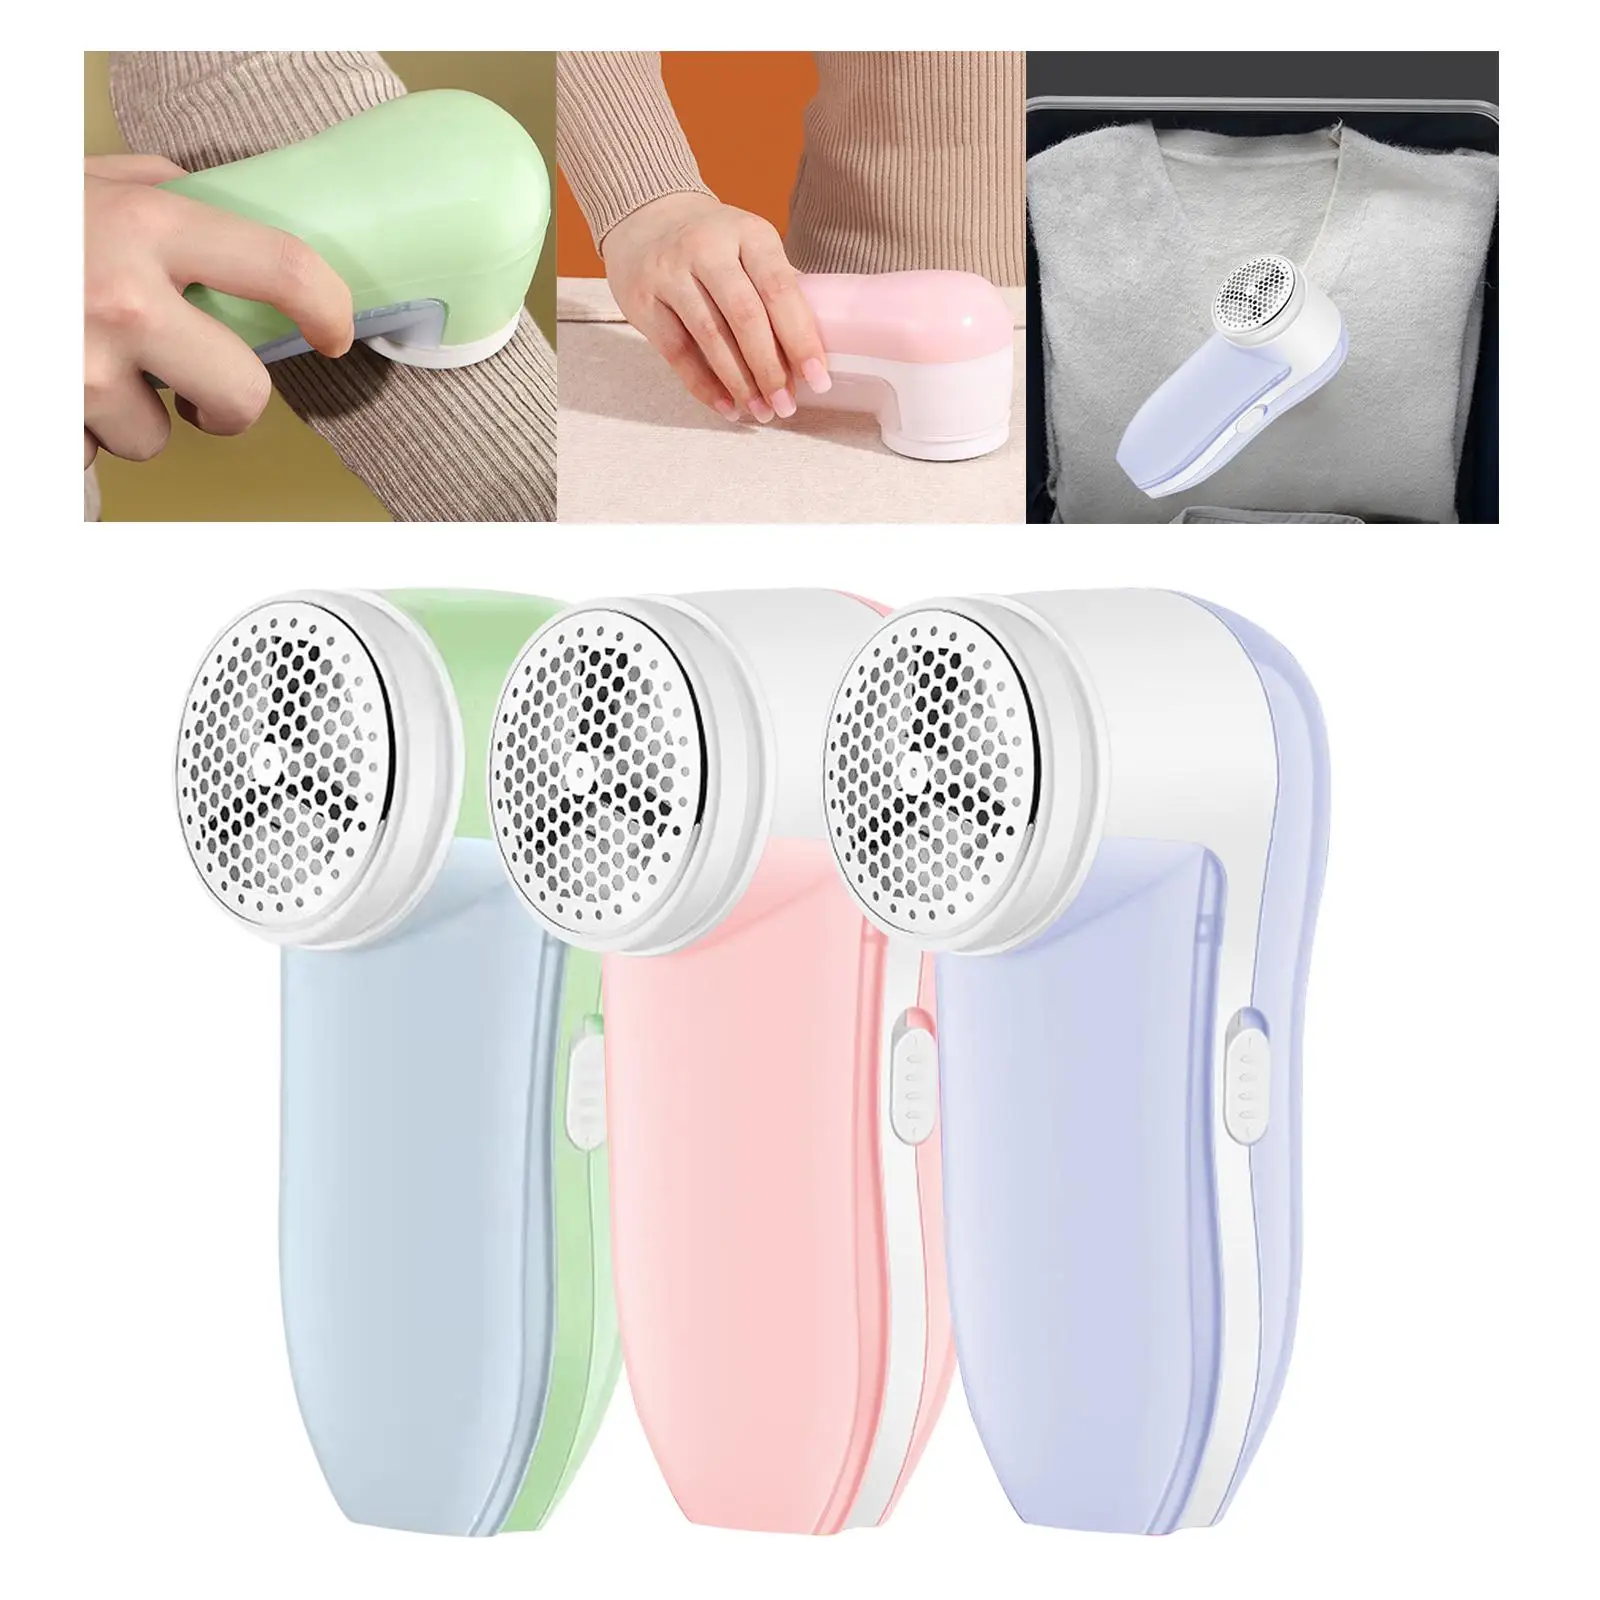 Fabric Shaver Pill Remover Remover USB Remove Fuzz Lint Pills Bobbles Trimmer Shaver Lint Shaver for Blanket Wool Bedding Cotton